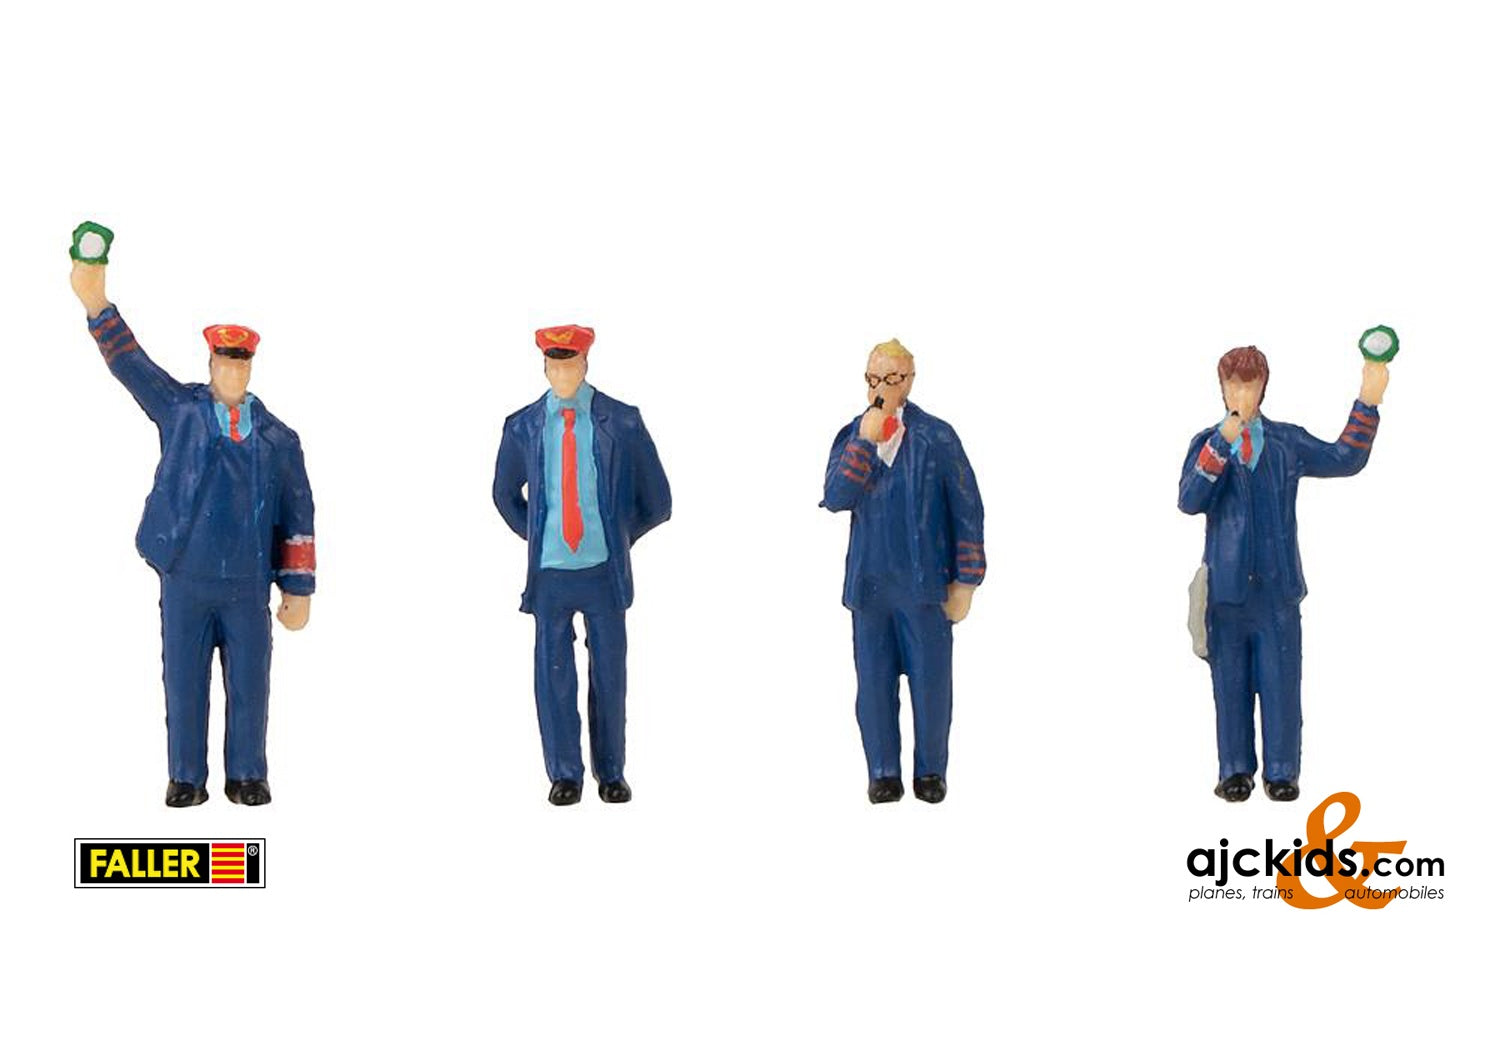 Faller 180237 - Railway staff & conductor whistle Figurine set with mini sound effect